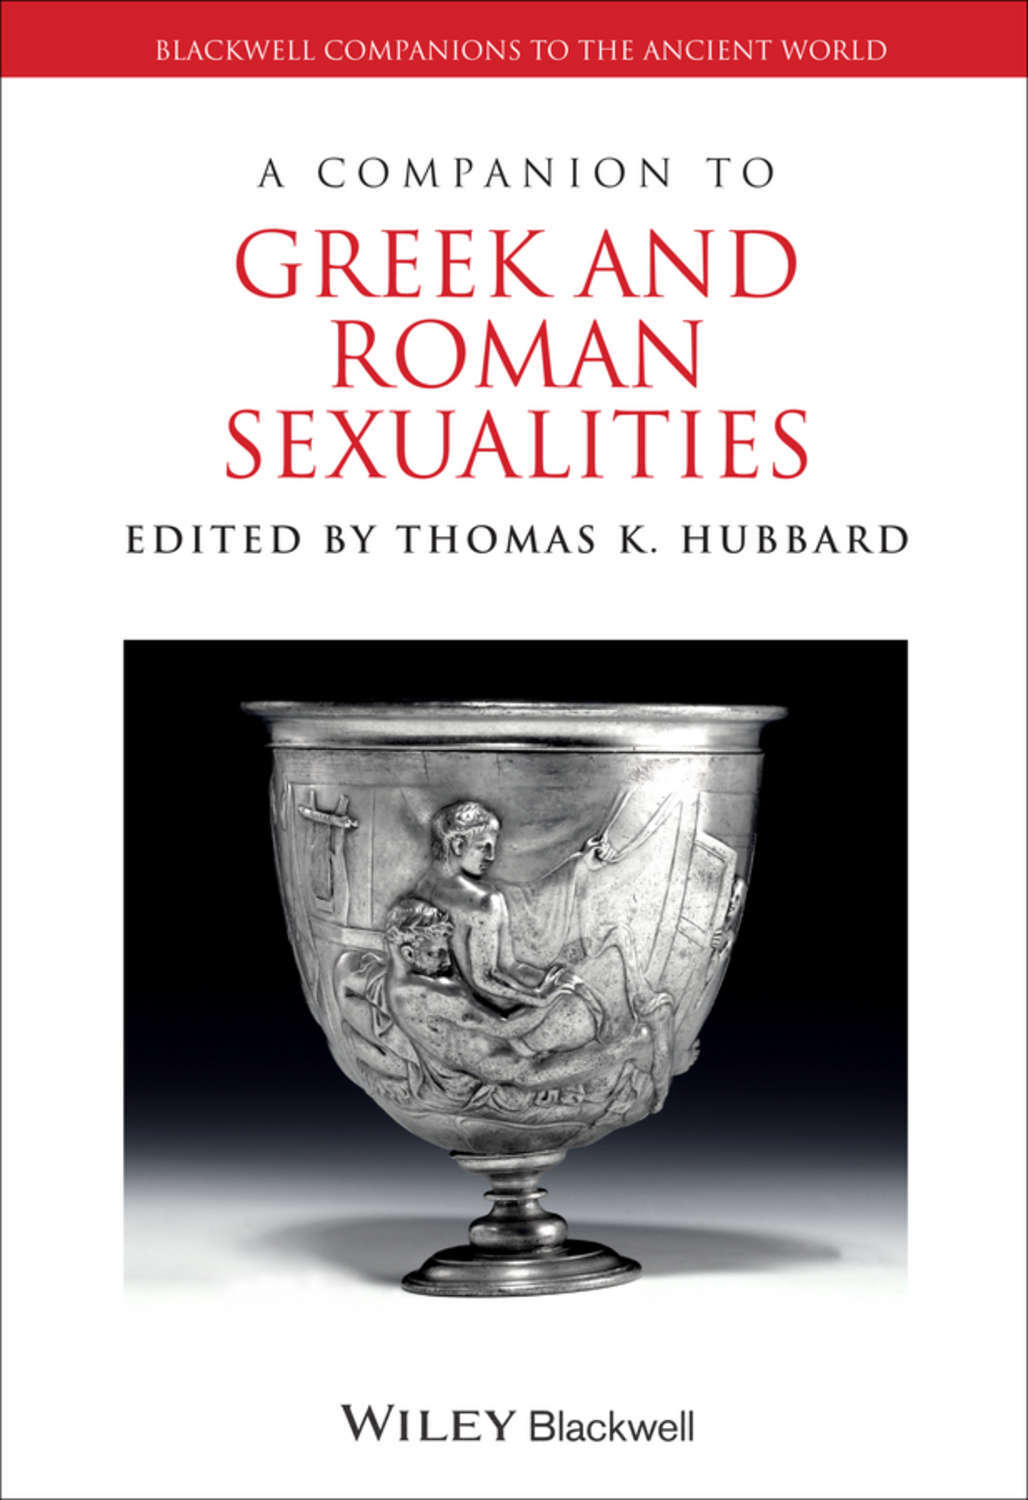 A Companion To Ancient Greek And Roman Music